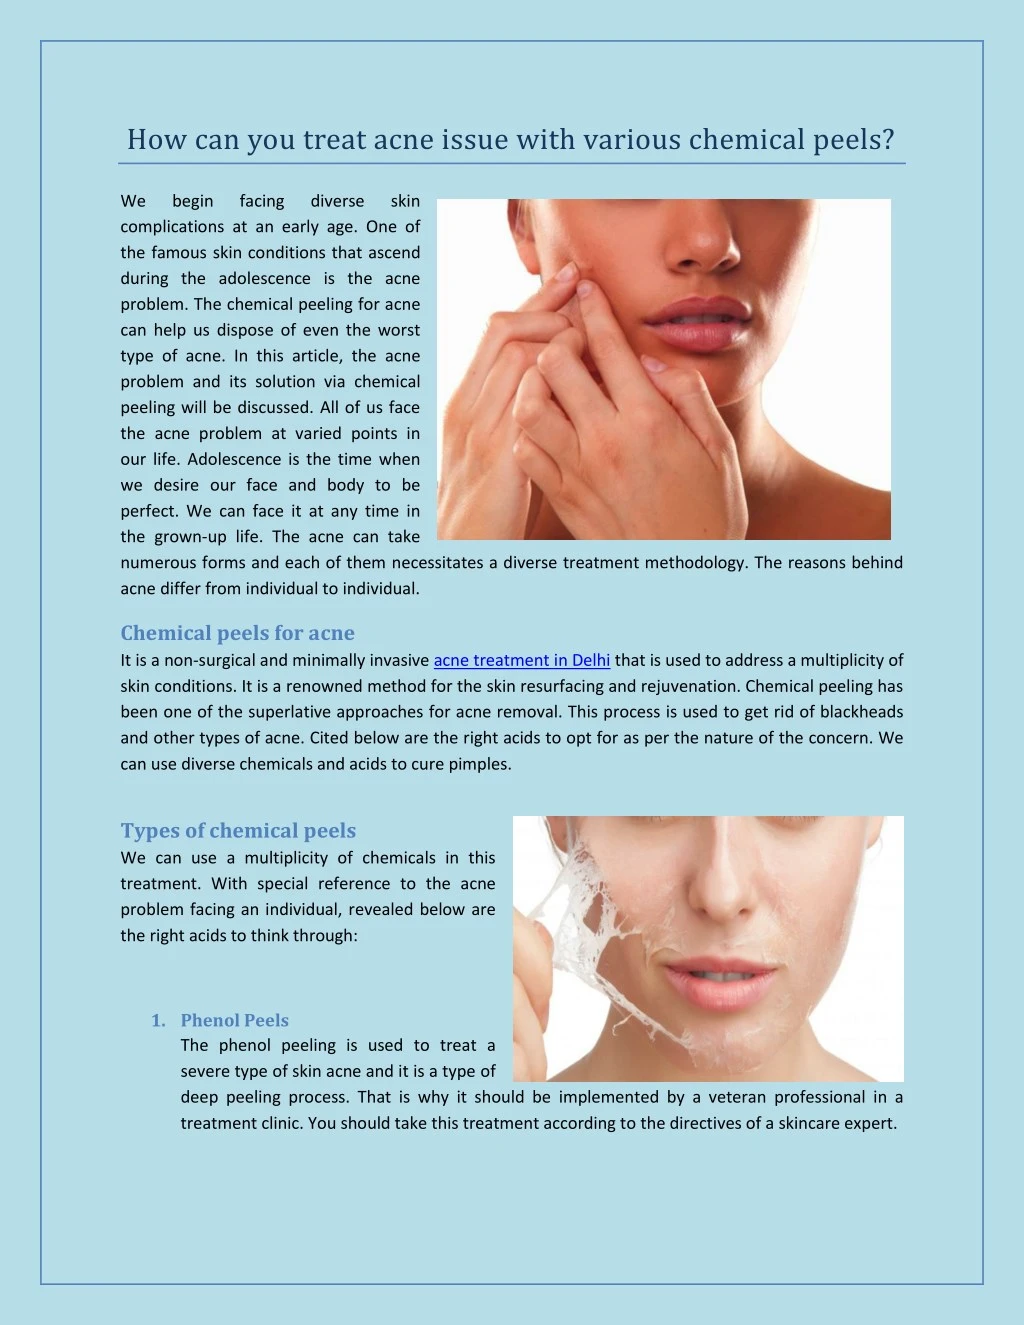 how can you treat acne issue with various